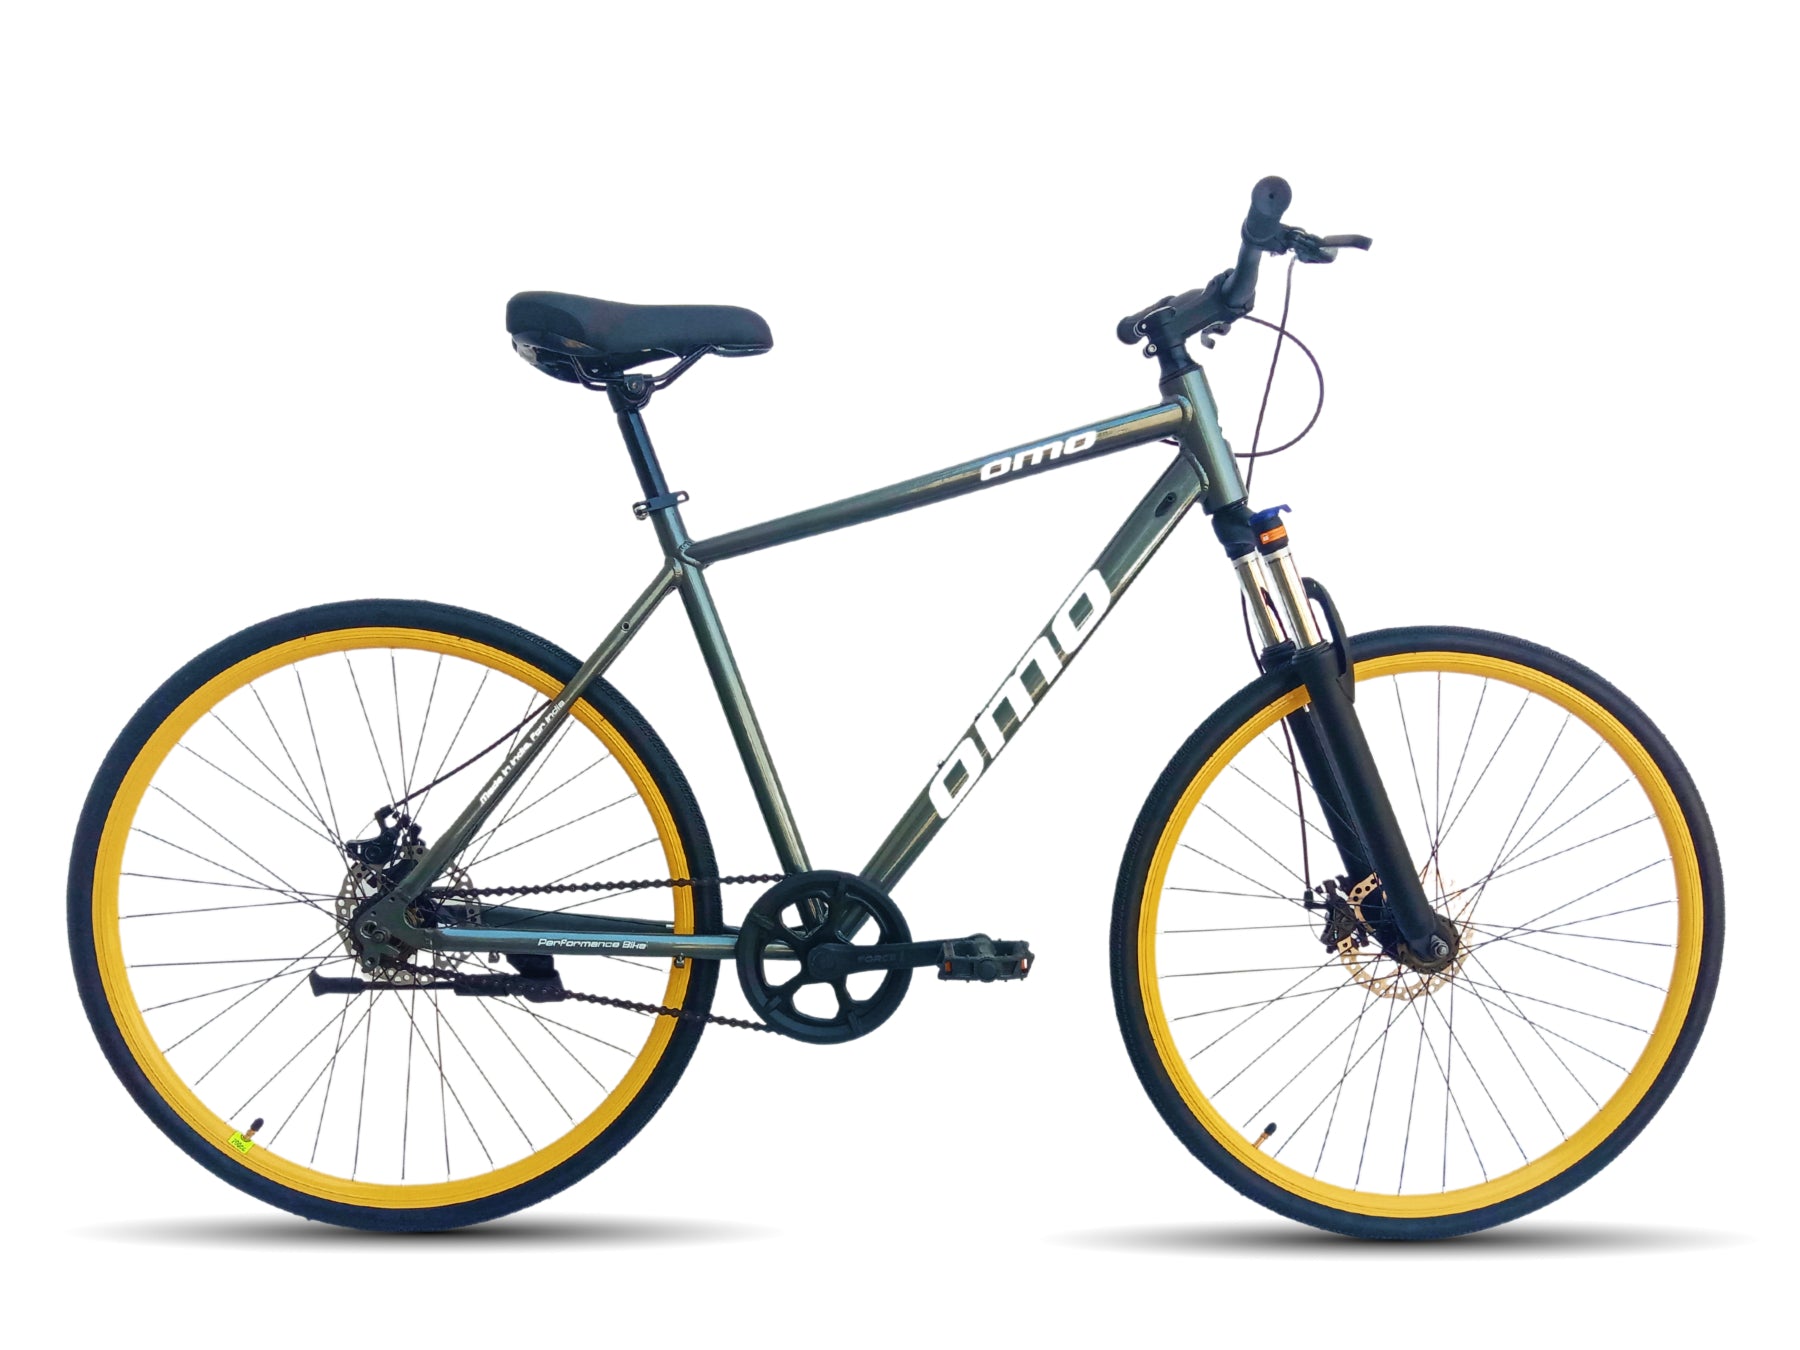 omobikes ladakh x1 single speed alloy frame hybrid bike with disc brake lockout suspension grey yellow color full side view